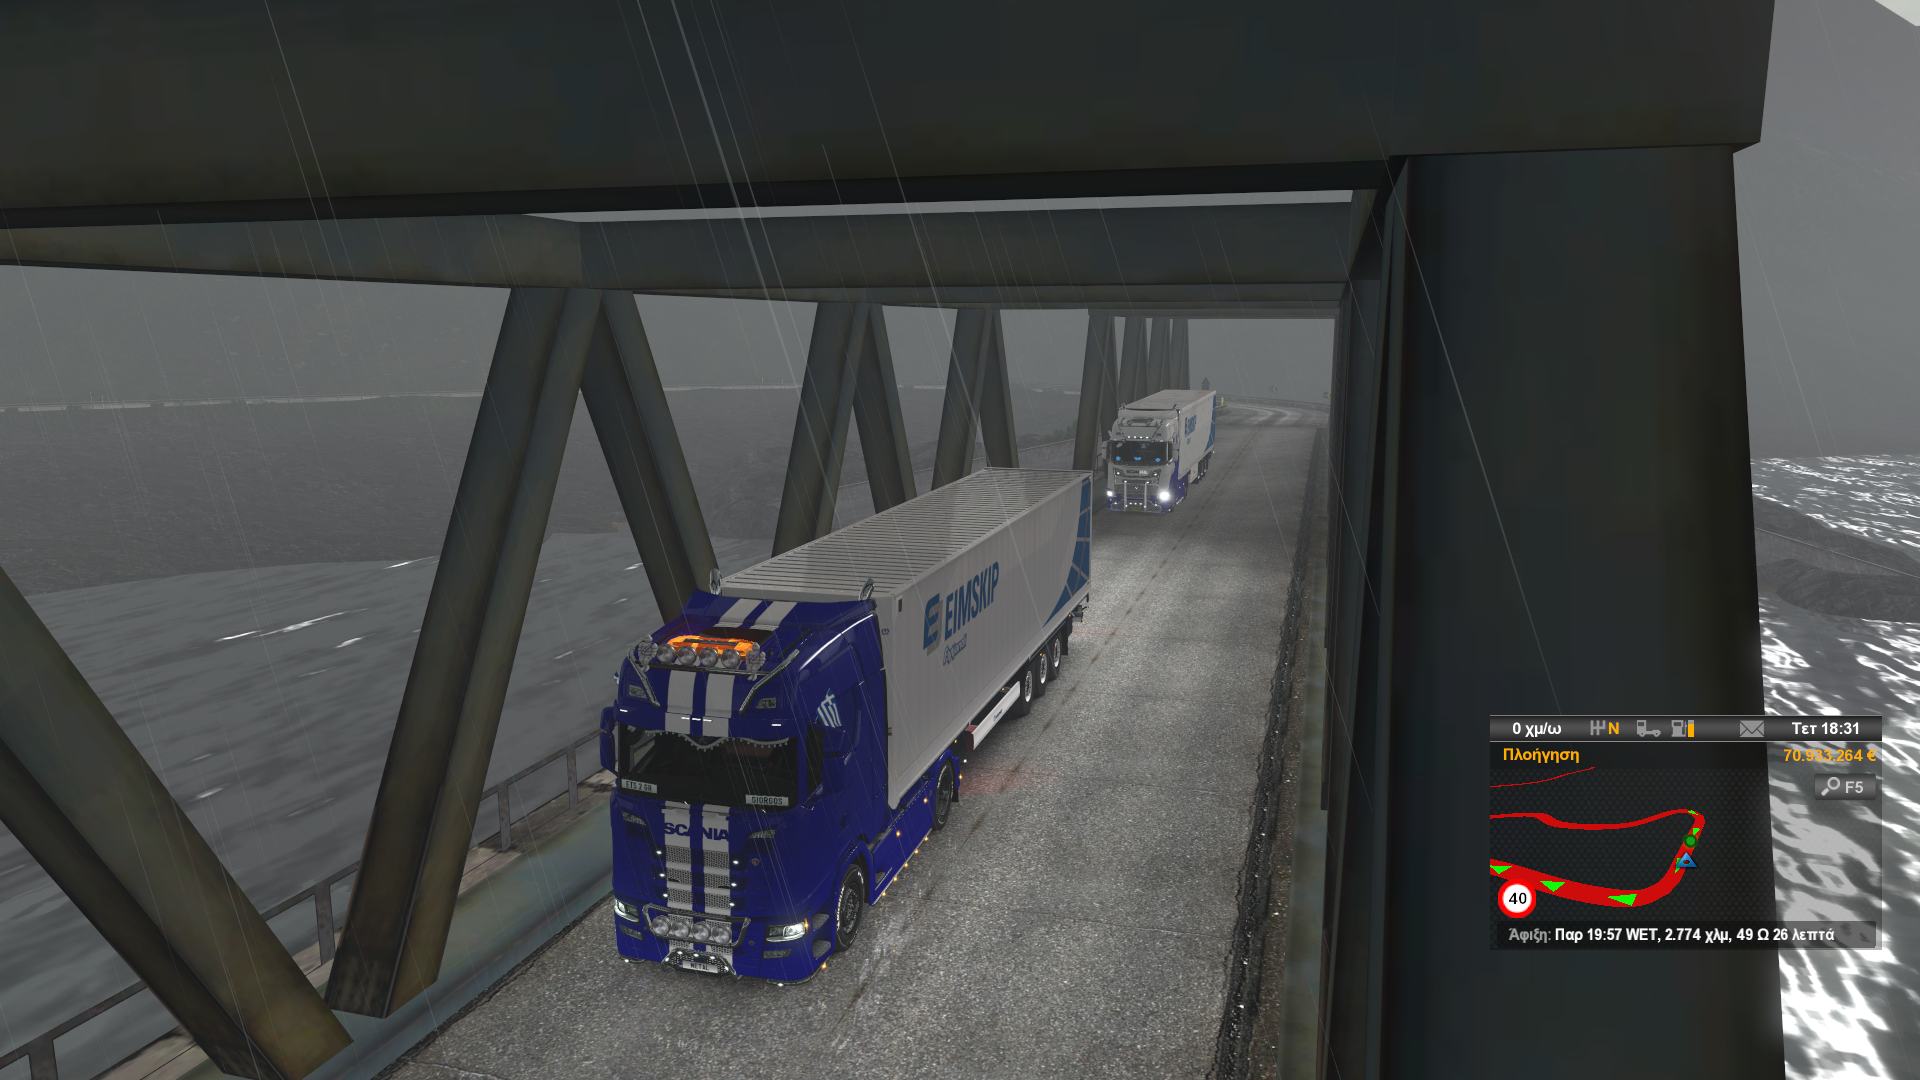 ets2_20200226_212128_00.png